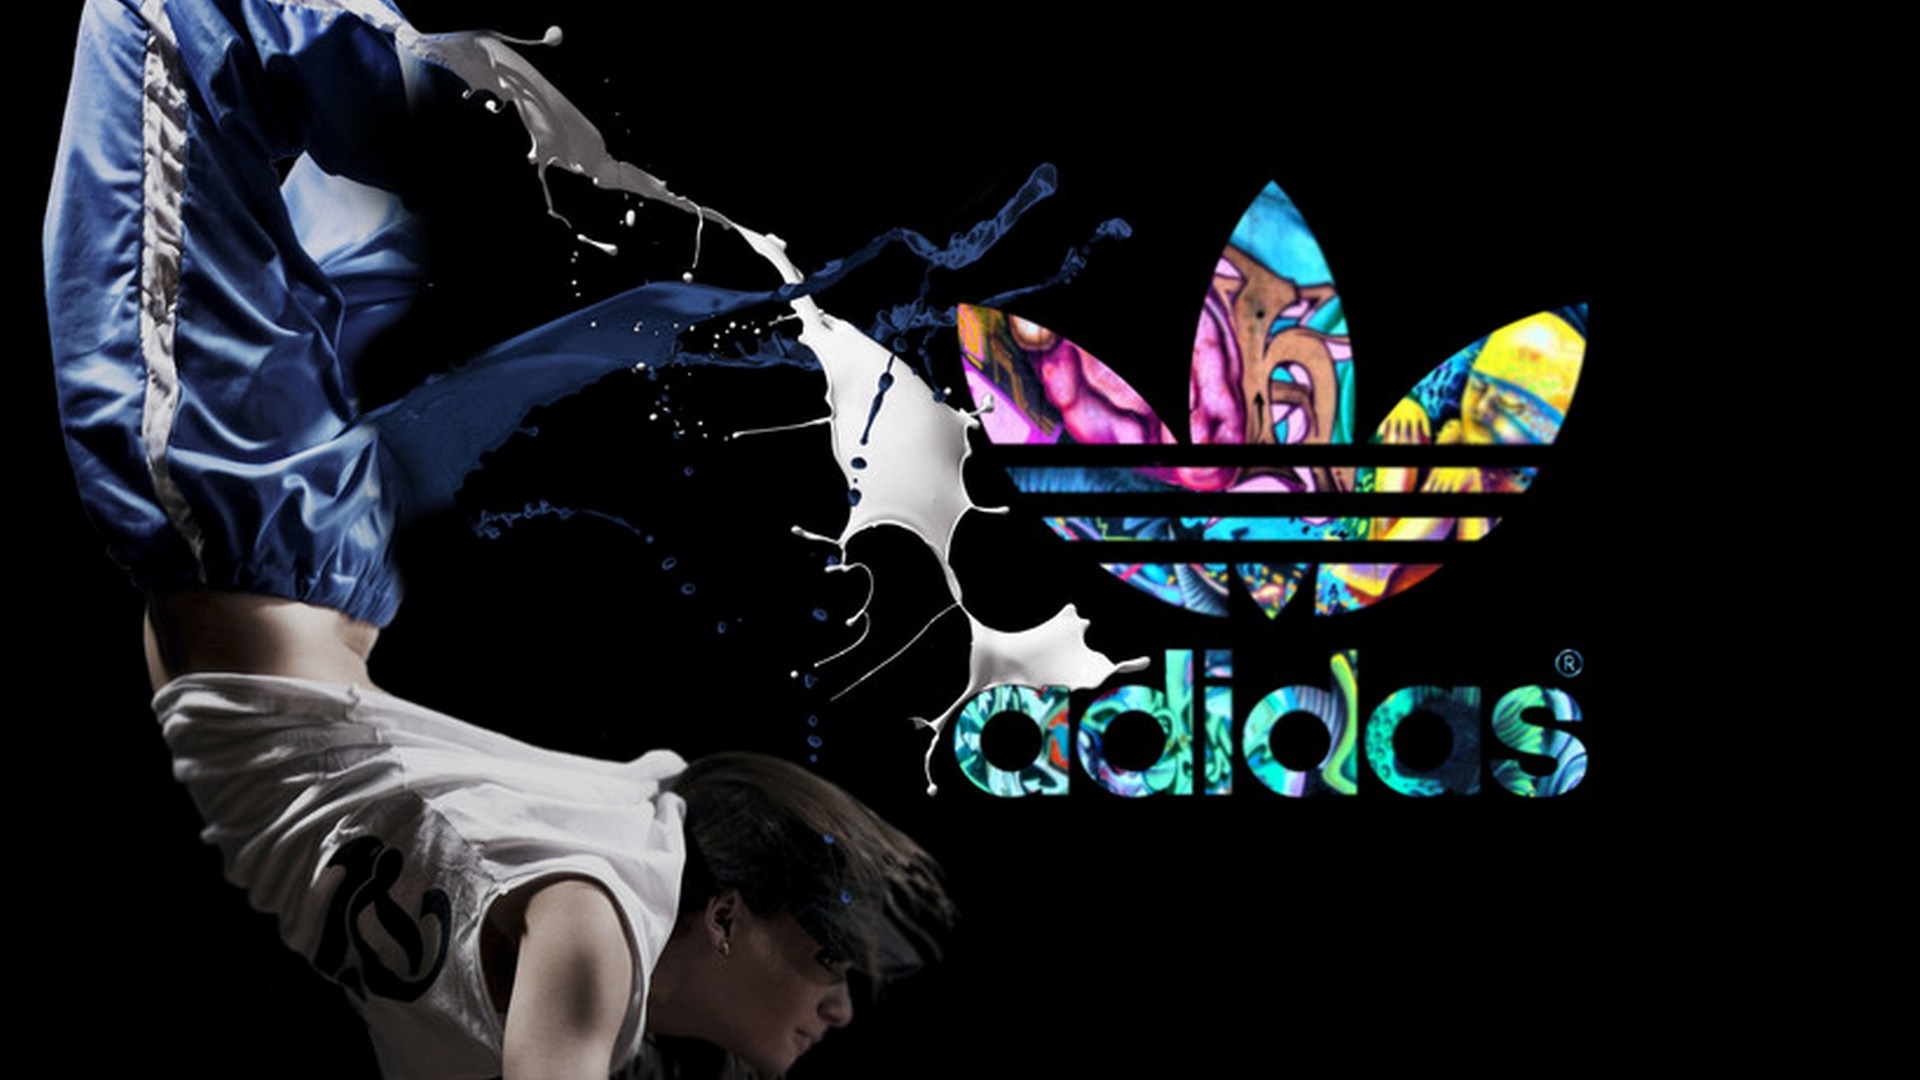 Best Adidas Wallpaper with high-resolution 1920x1080 pixel. You can use this wallpaper for your Windows and Mac OS computers as well as your Android and iPhone smartphones